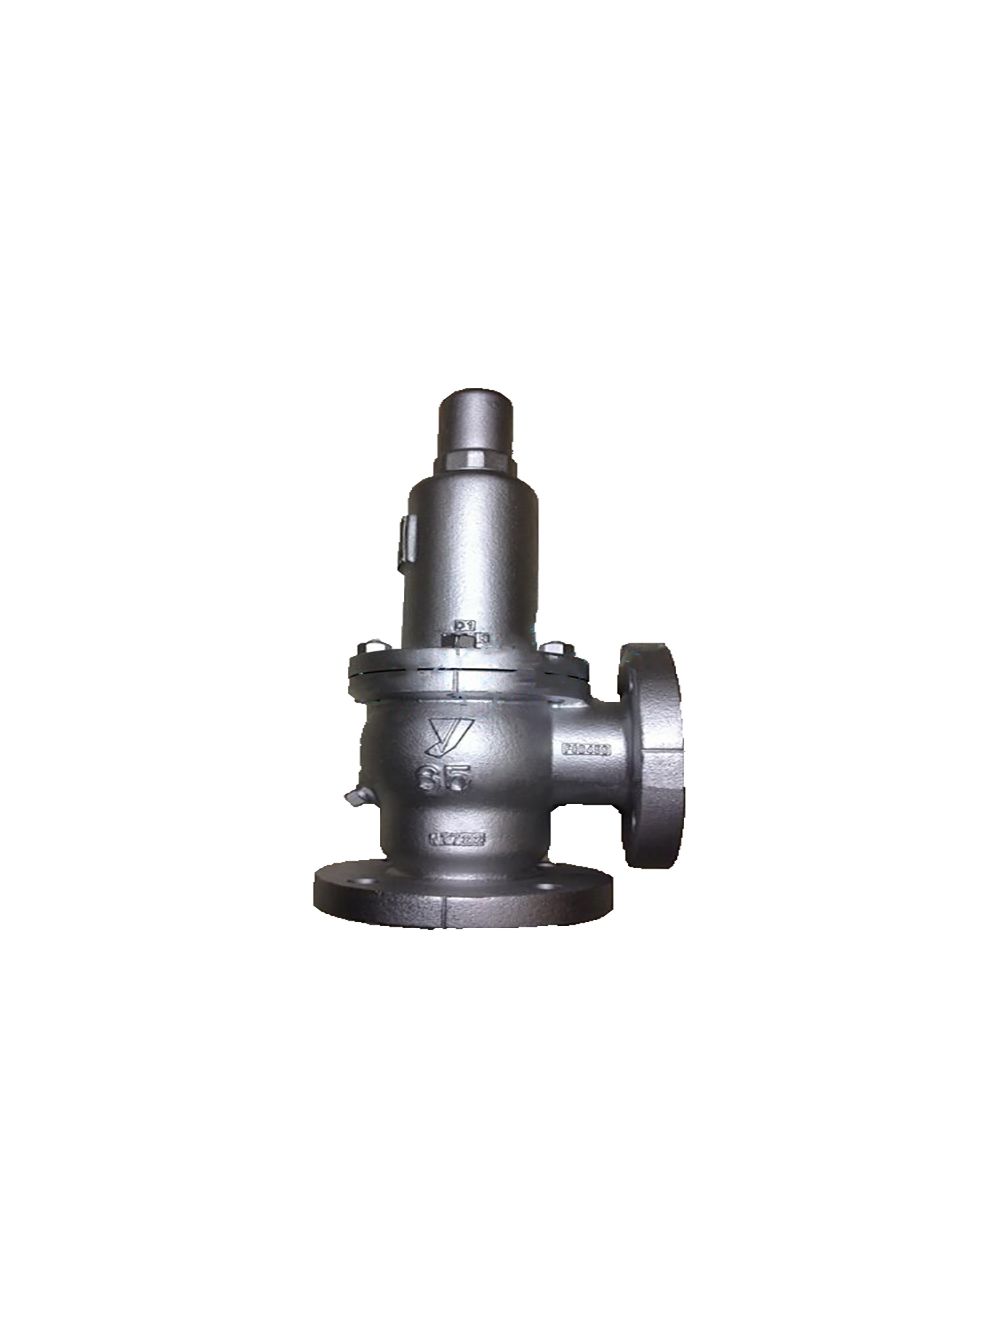 New In stock for sale, Yoshitake Safety Valve AL-4(DN80)